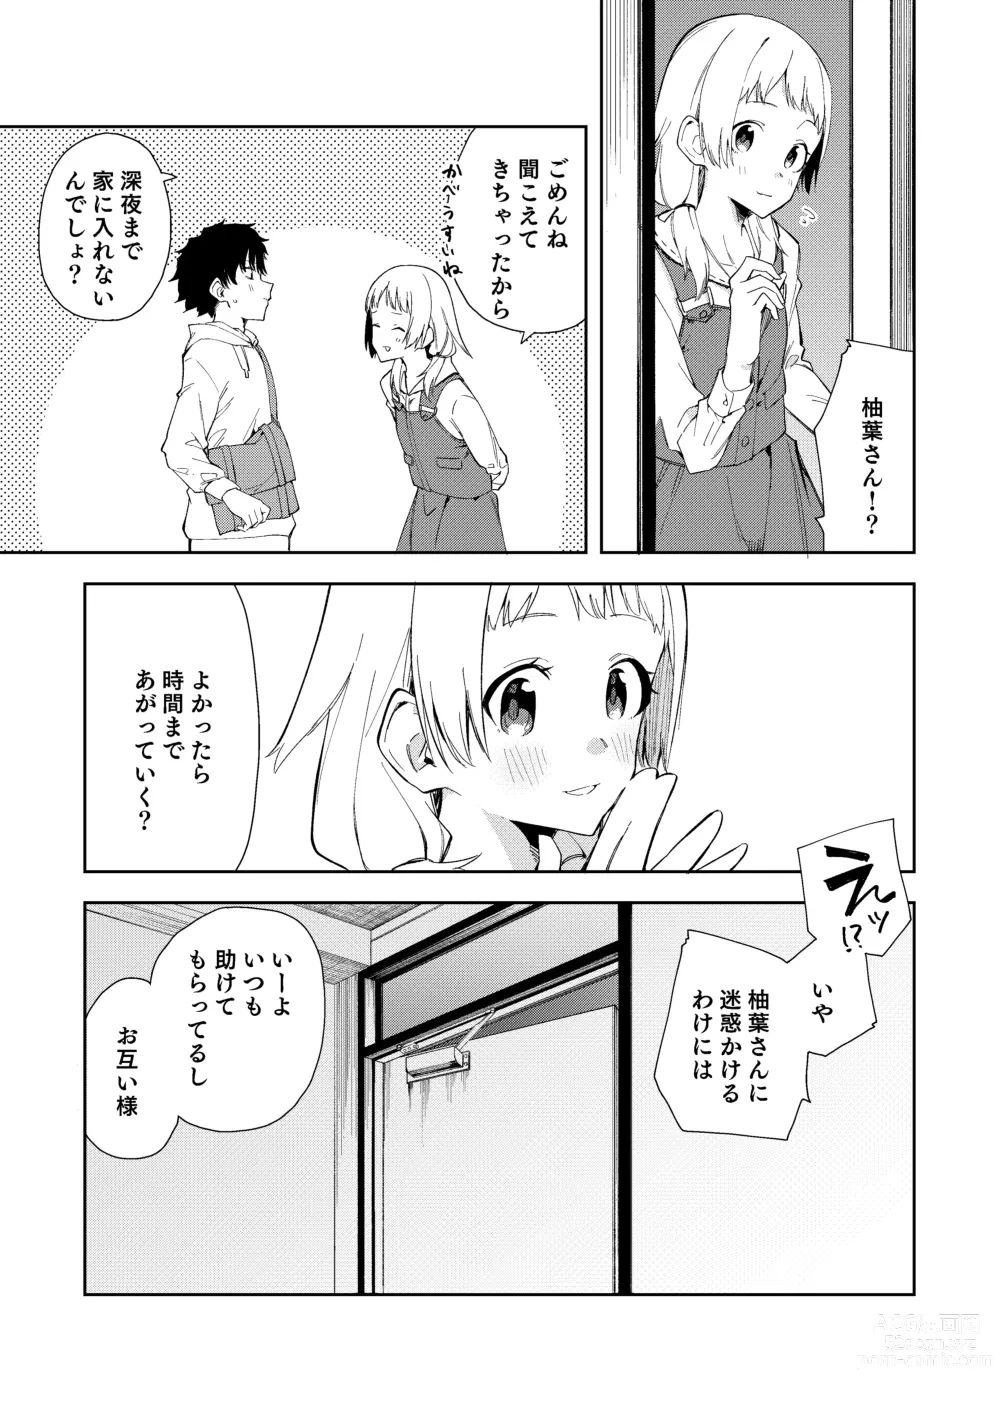 Page 6 of doujinshi 隣人は有名配信者